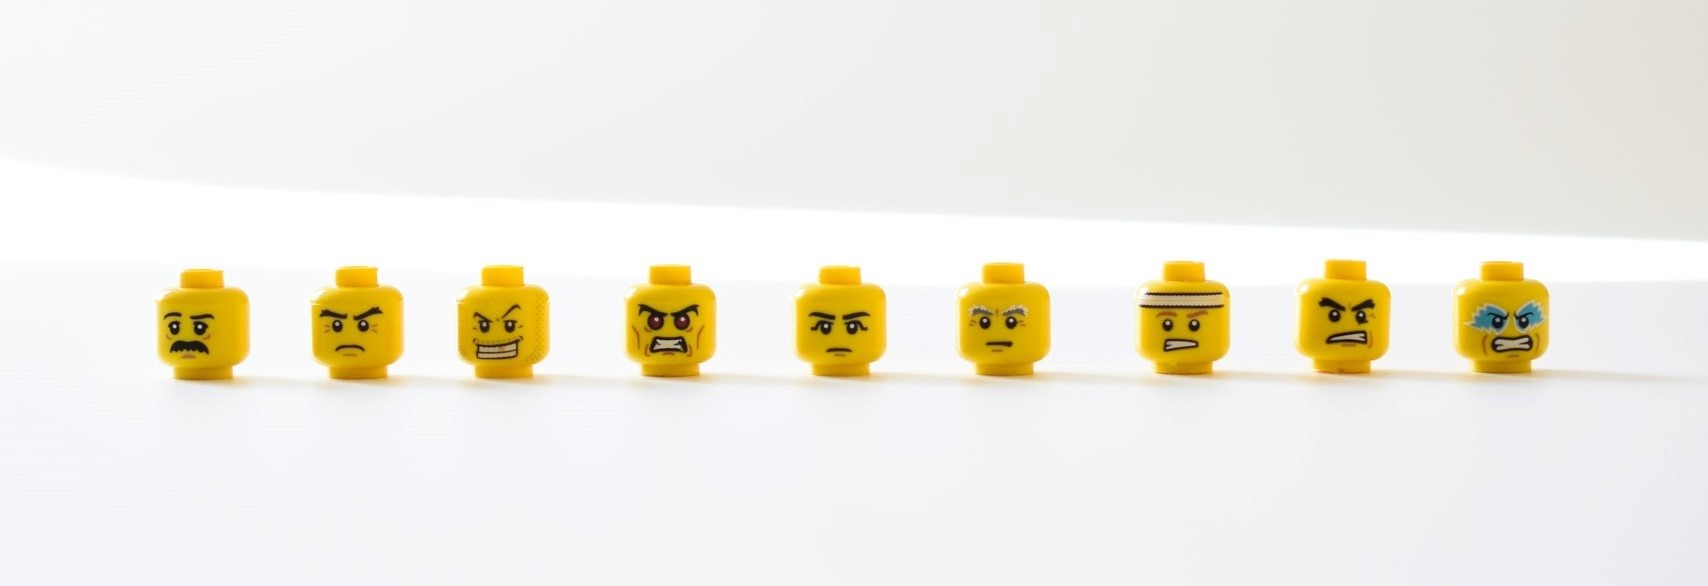 lego people heads with various emotions